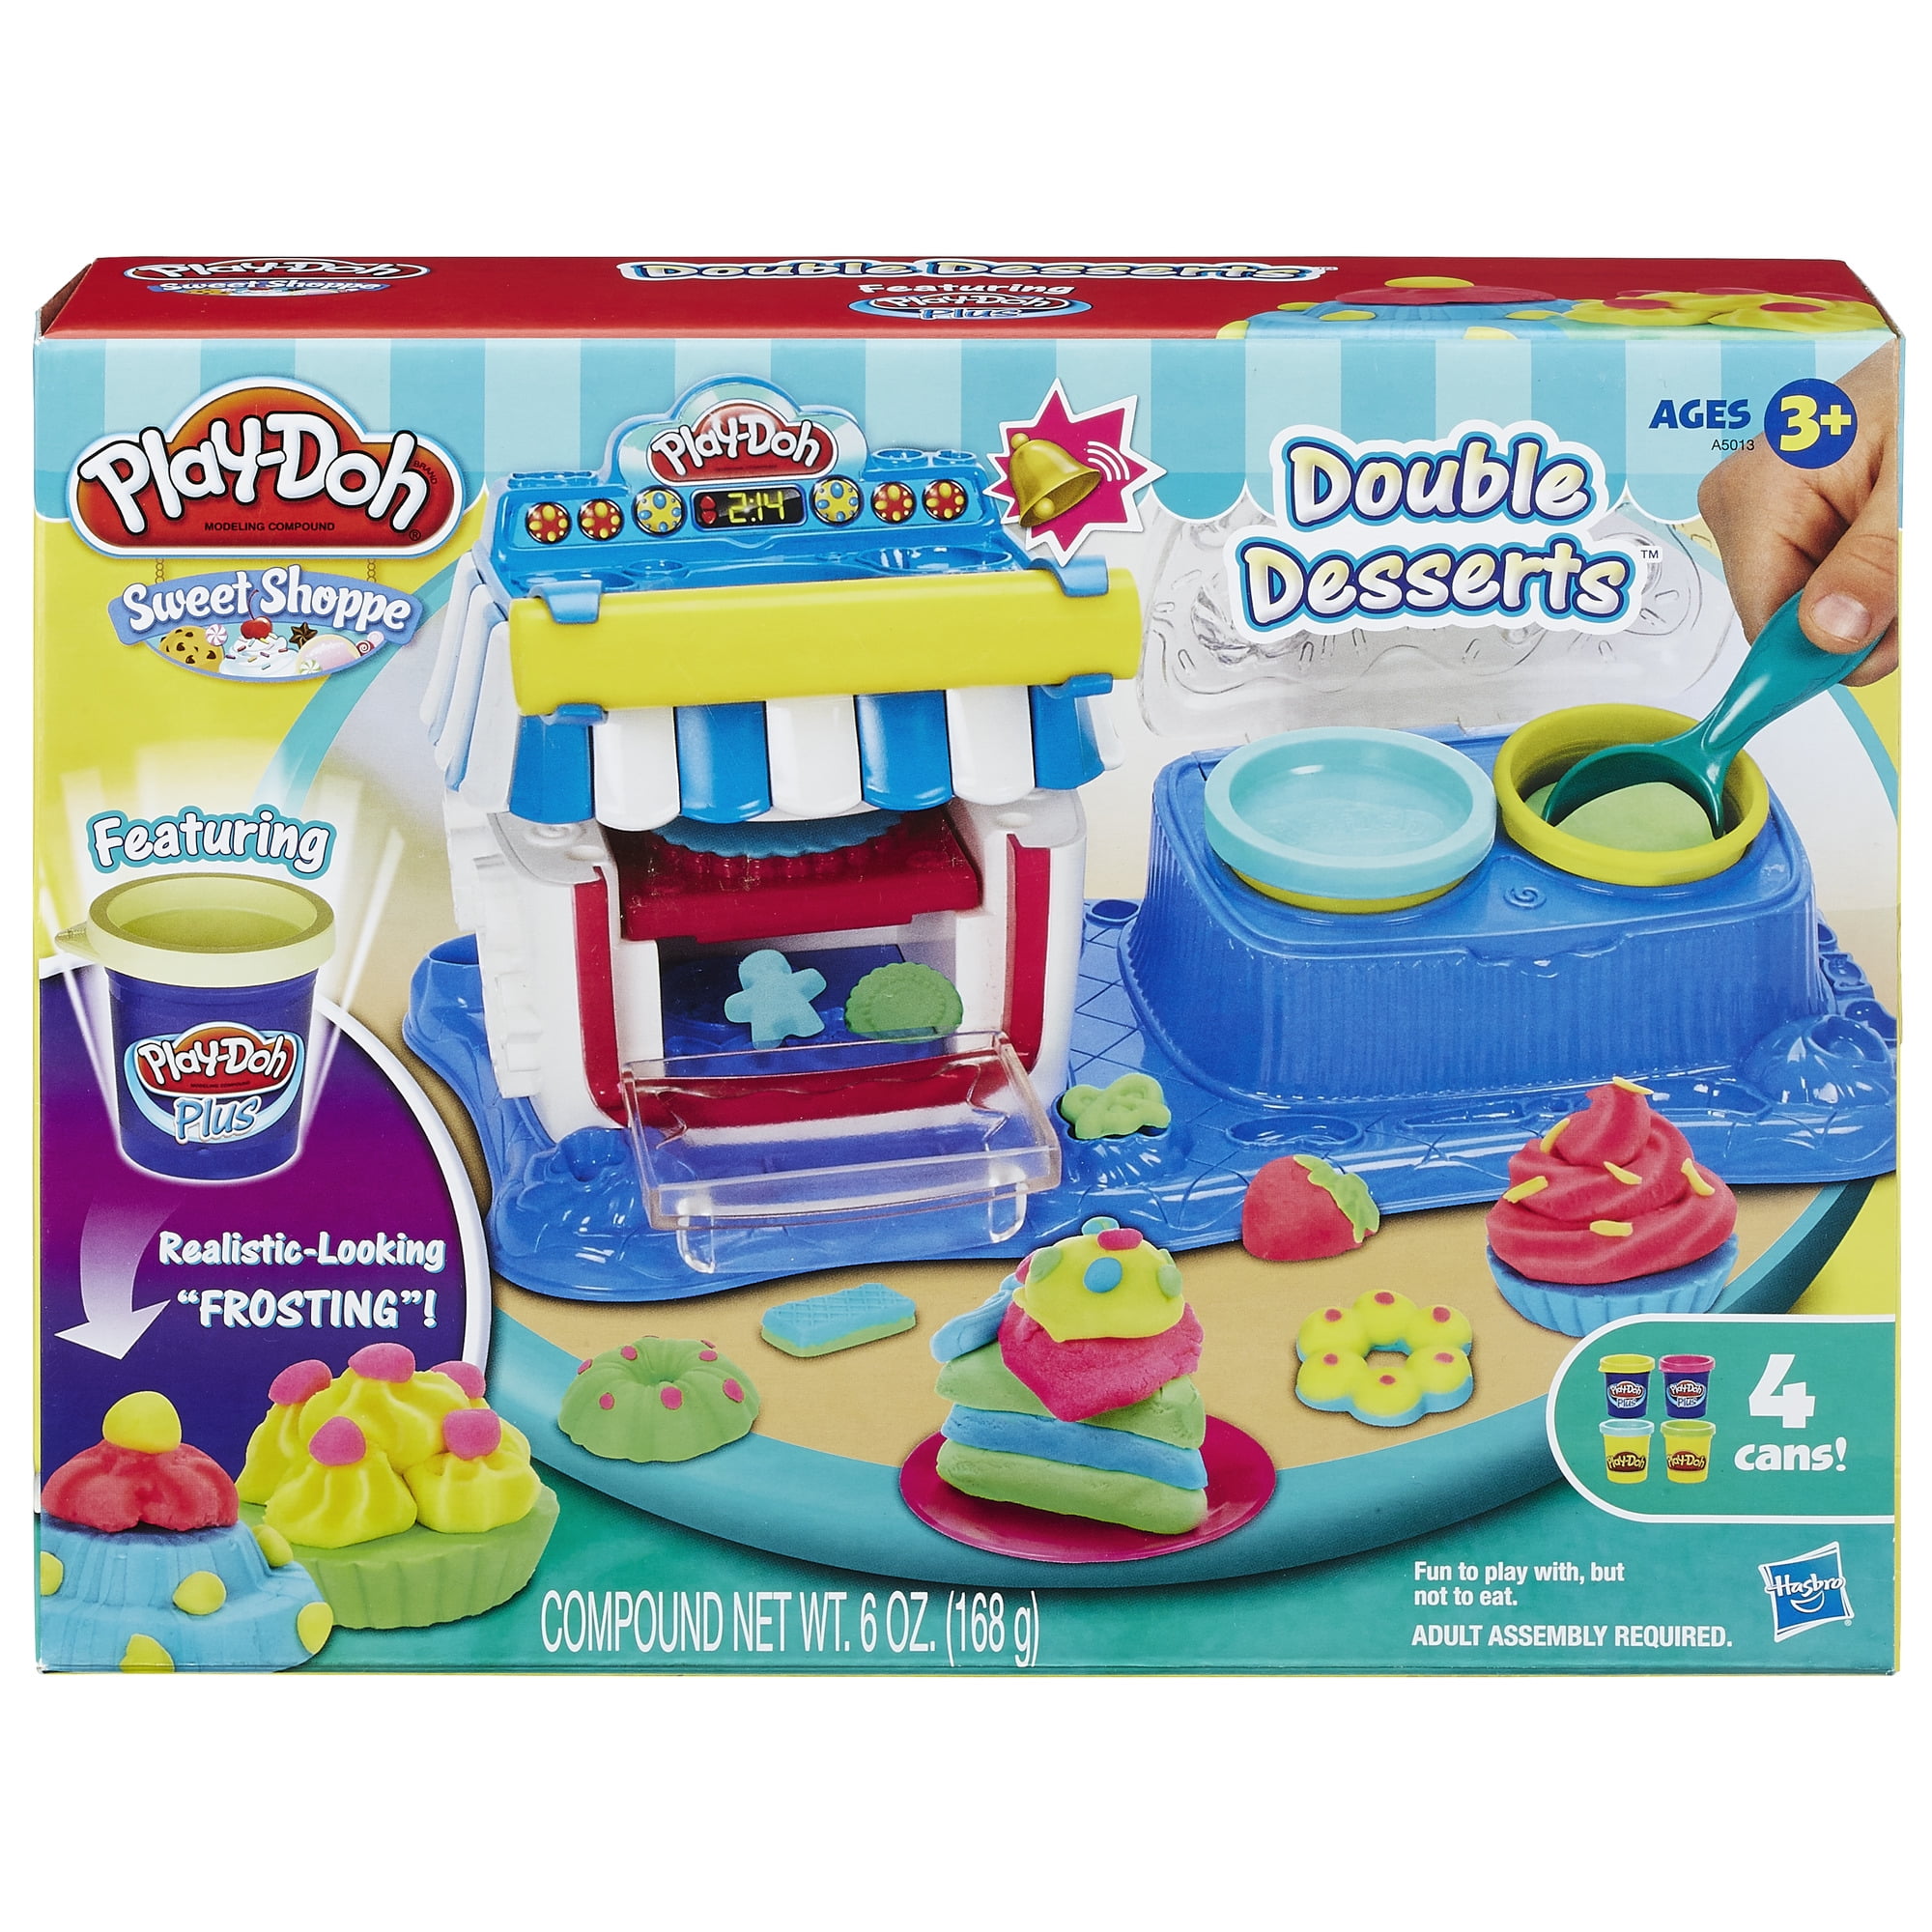 Sweet Shoppe Sweet Bakin' Creations Play-Doh Brand New Sealed 4 cans 